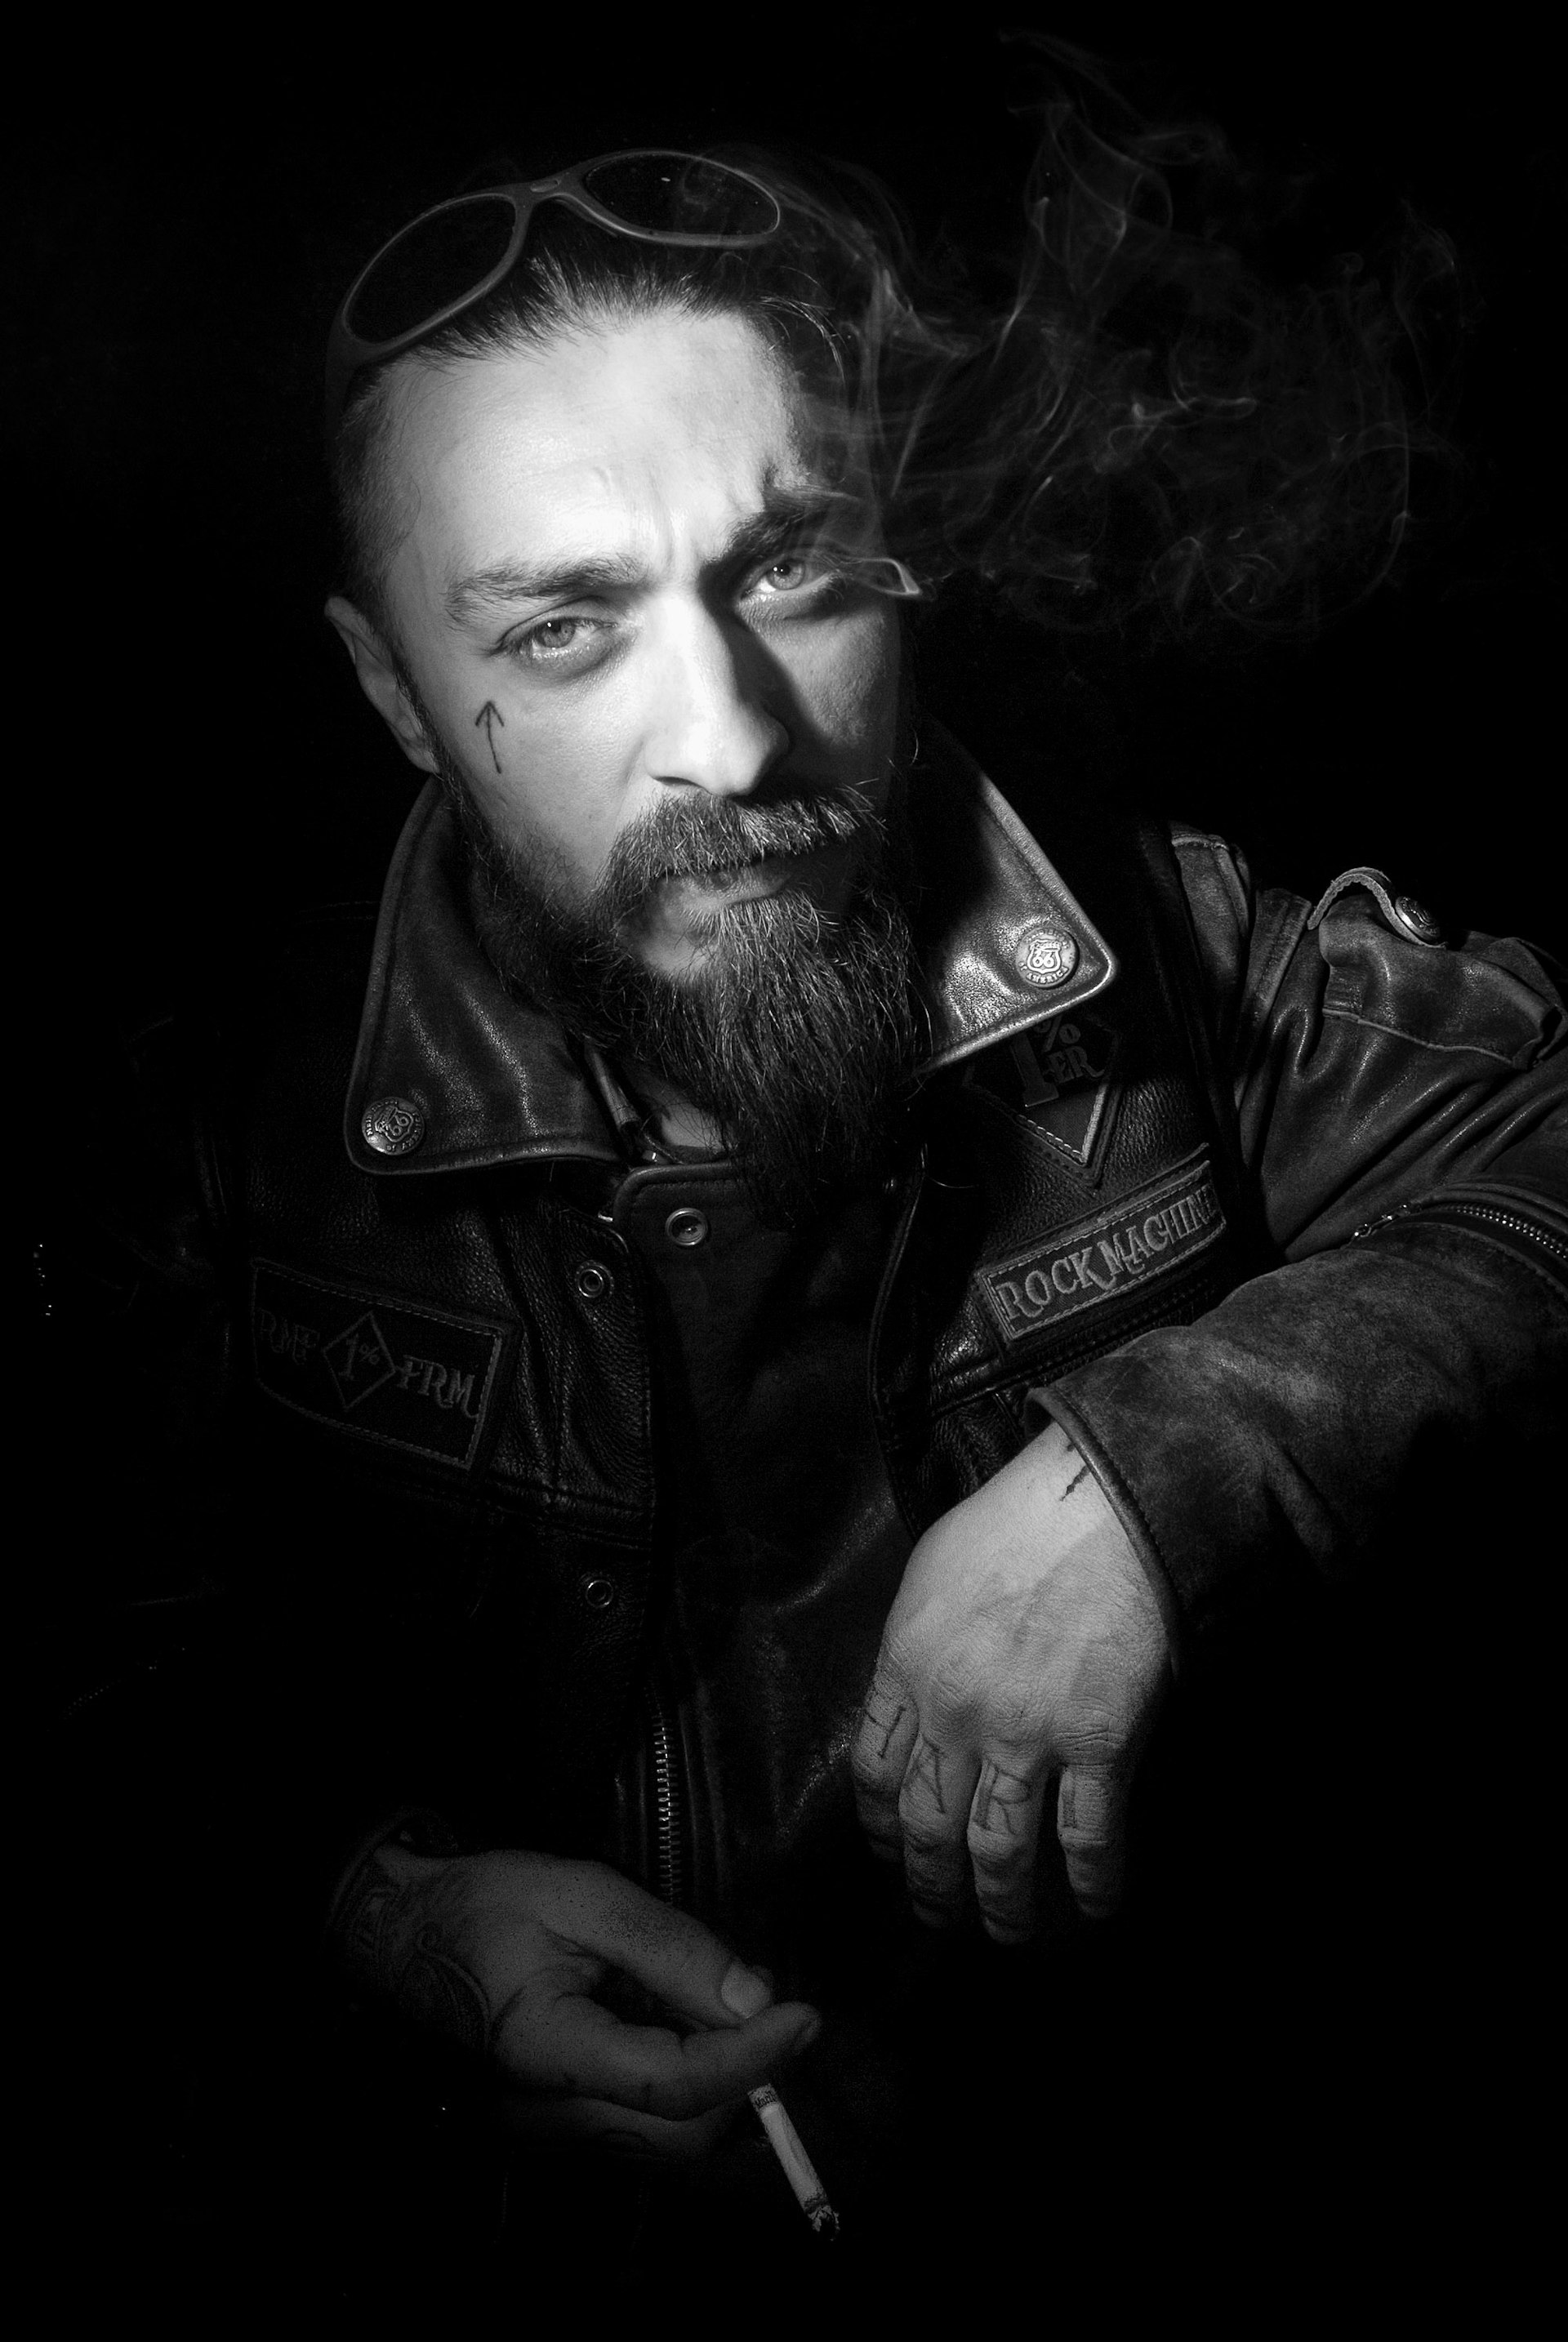 David, a biker from Yerevan, Armenia, now resident in Moscow and a member of the Russian Chapter of the Rock Machine MC visiting Cross Riders and Tbilisi. Formed in 1986 in Canada and with its main chapters there and in the U.S and Australia, the Rock Machine MC was considered an international outlaw motorcycle club until disavowing its criminal past in 2008.